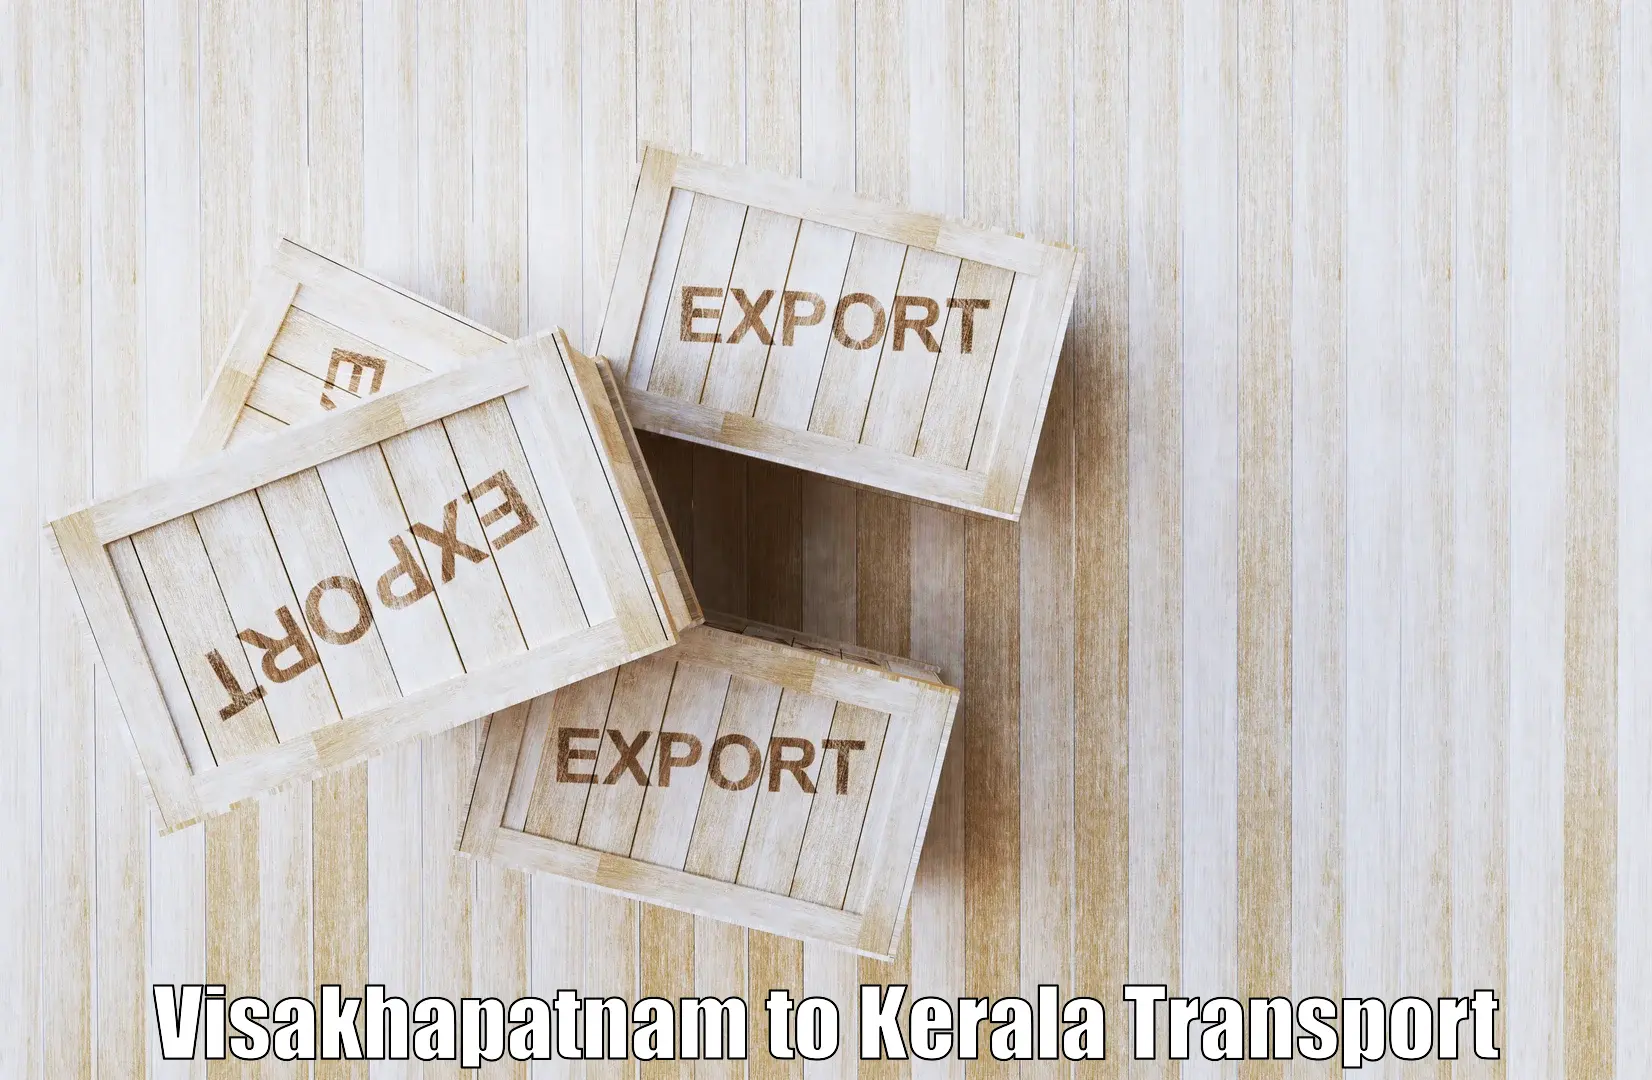 Container transportation services in Visakhapatnam to Pala